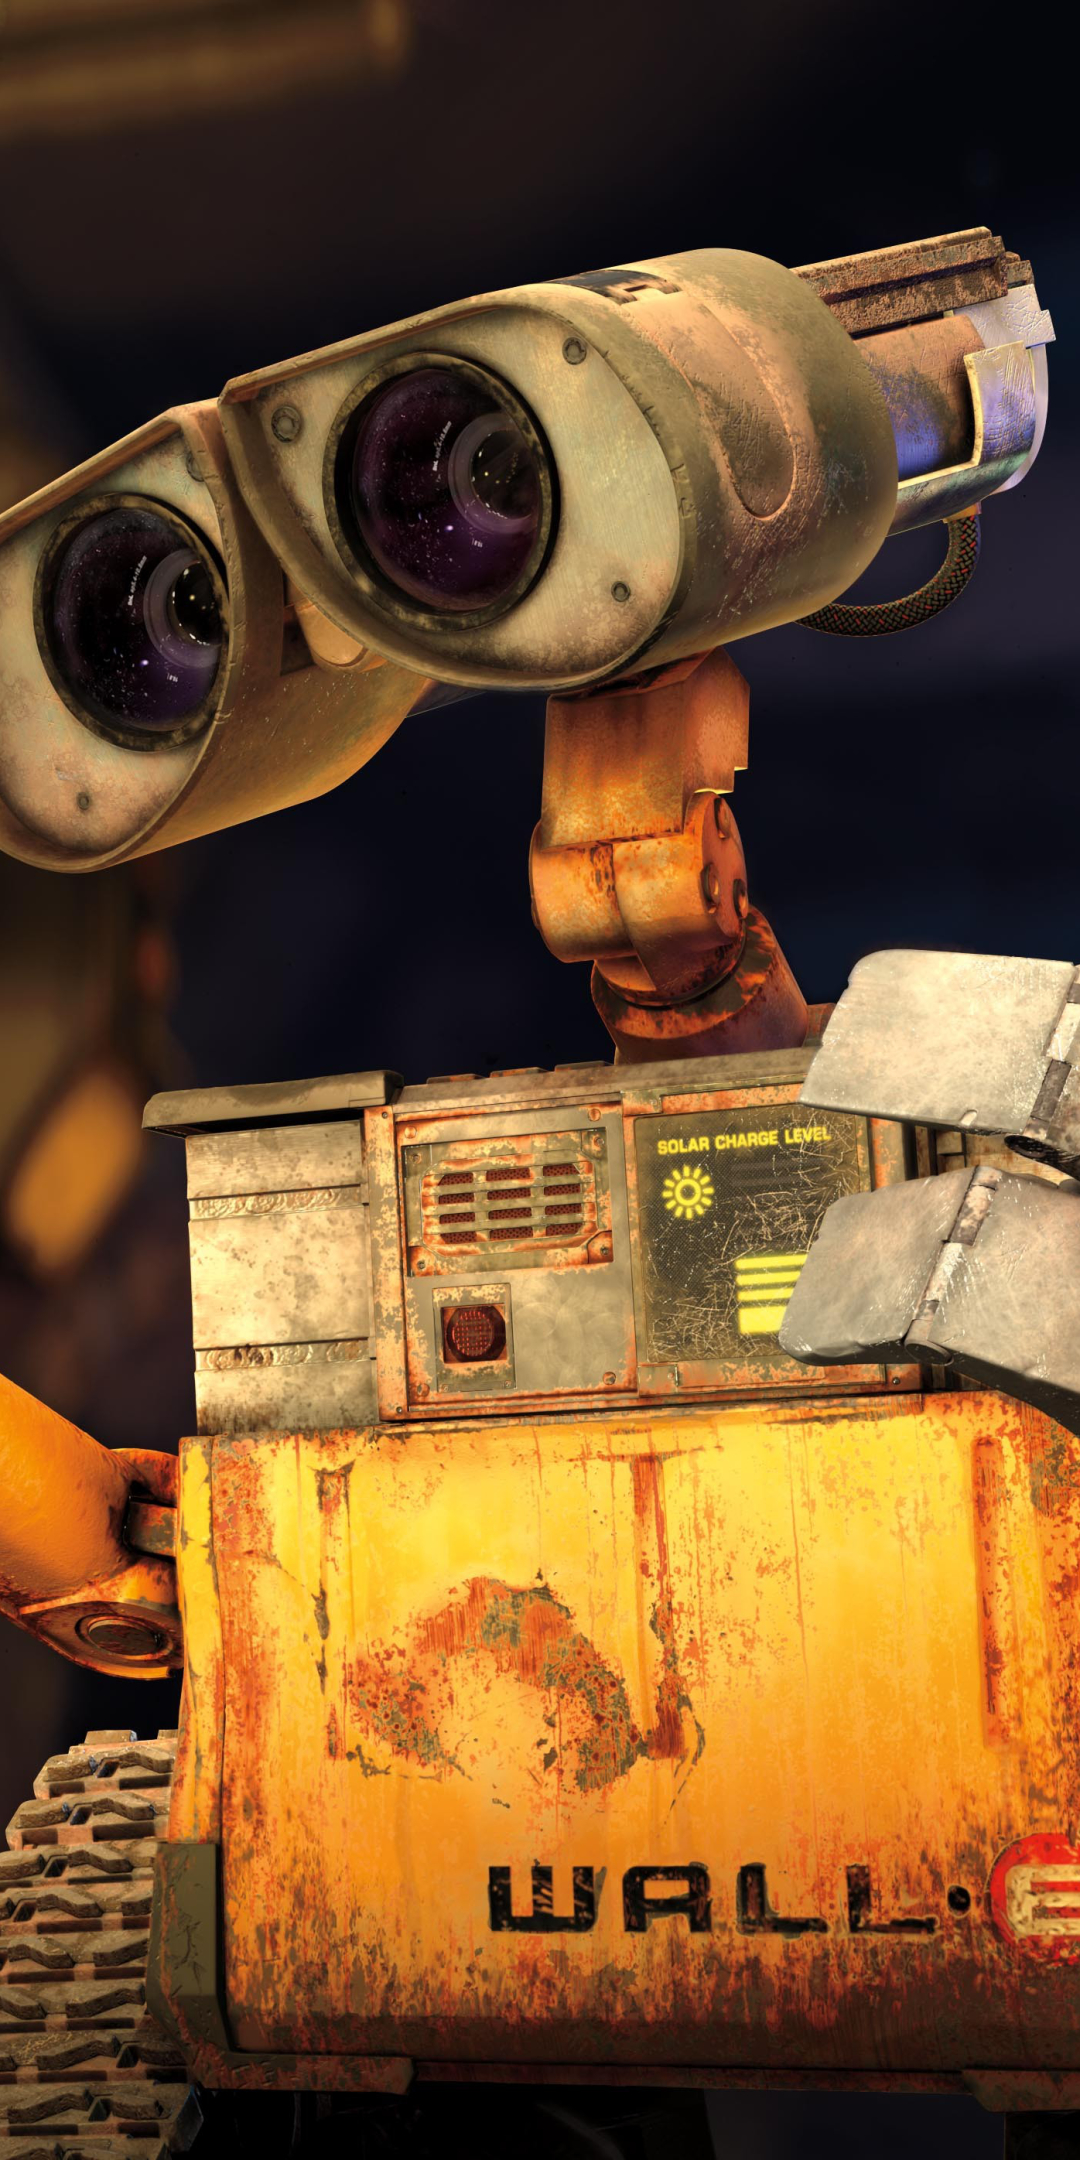 WALLE Wallpapers 38 images inside